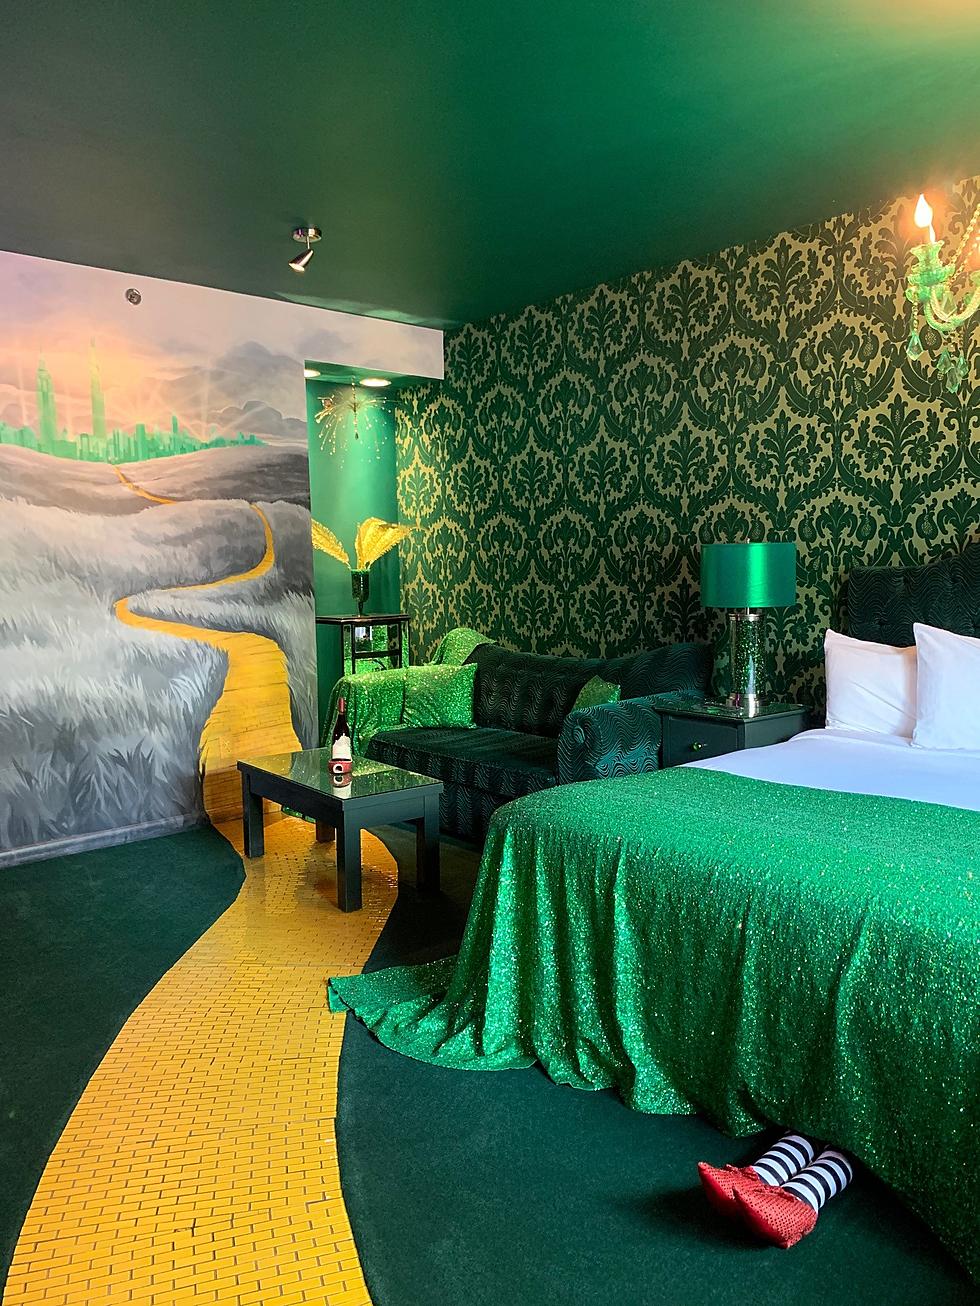 Escape Reality at These &#8220;Maximalists&#8221; Fantasy Suites